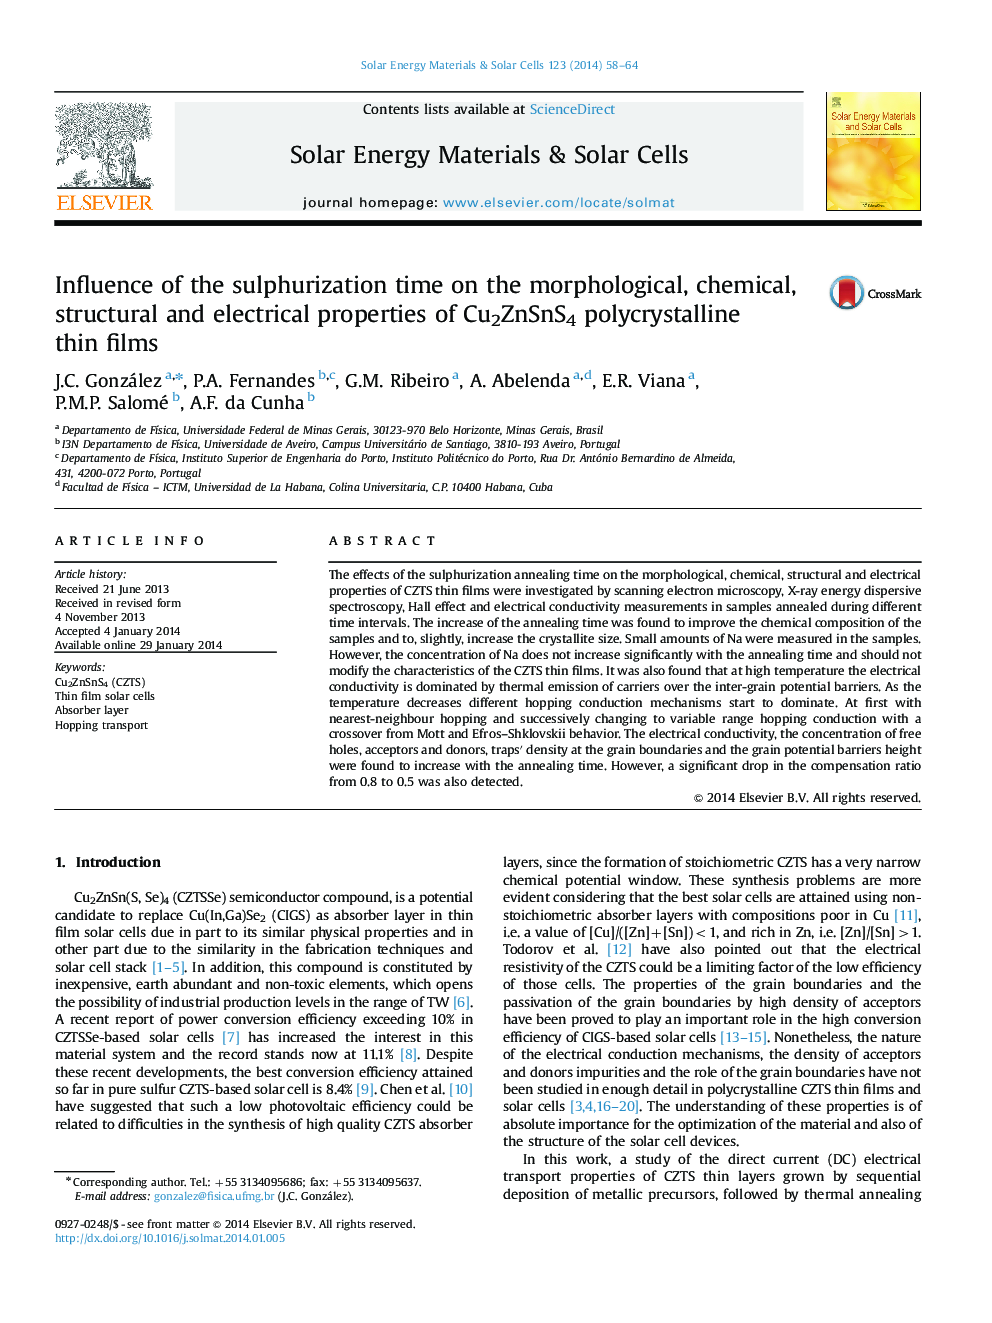 Influence of the sulphurization time on the morphological, chemical, structural and electrical properties of Cu2ZnSnS4 polycrystalline thin films